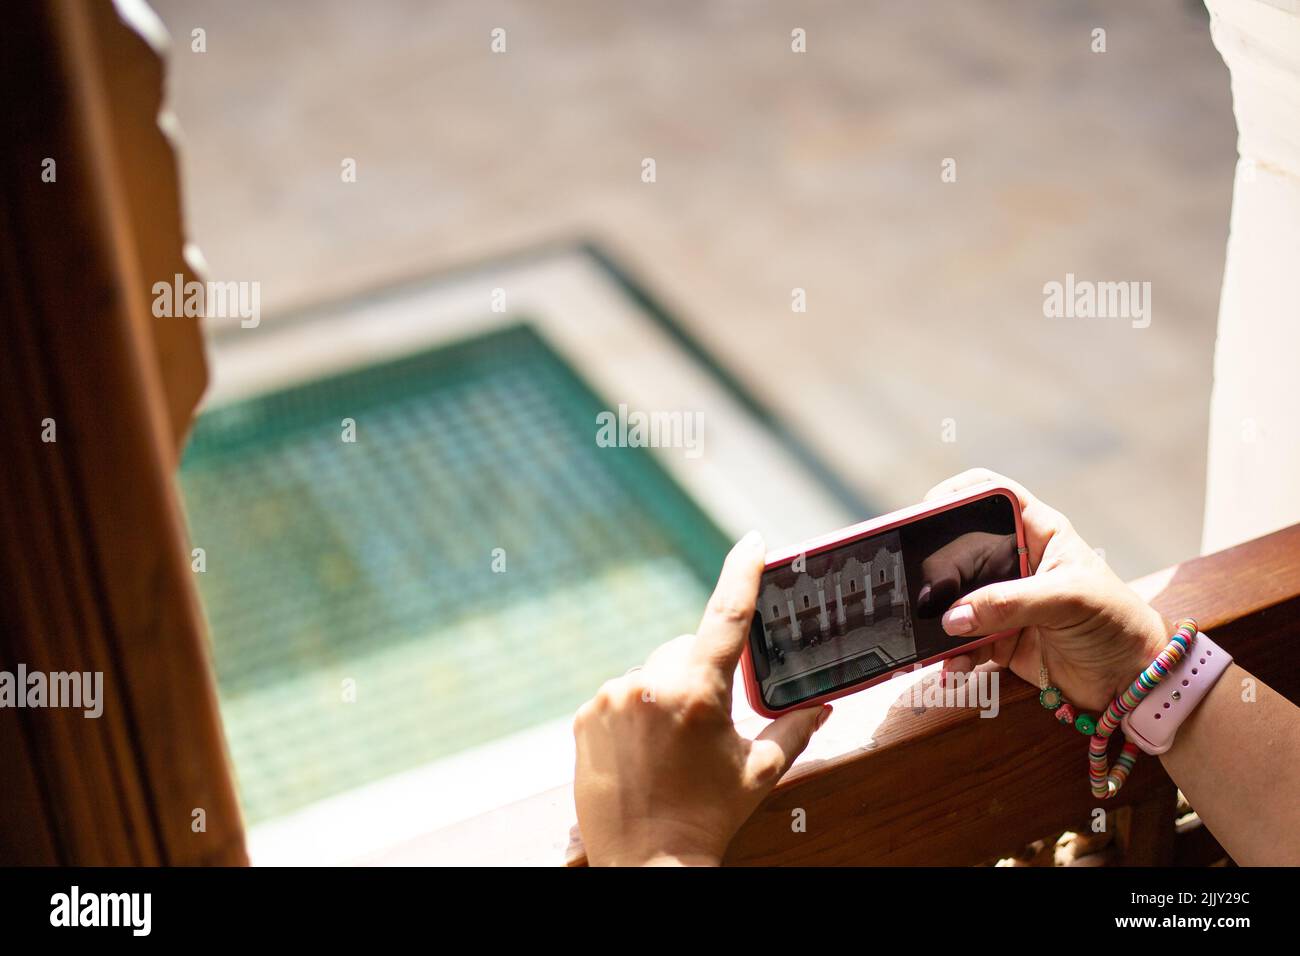 Taking a picture with a smart phone handheld at the edge of a window on a touristic place in Marrakesh, Morocco Stock Photo